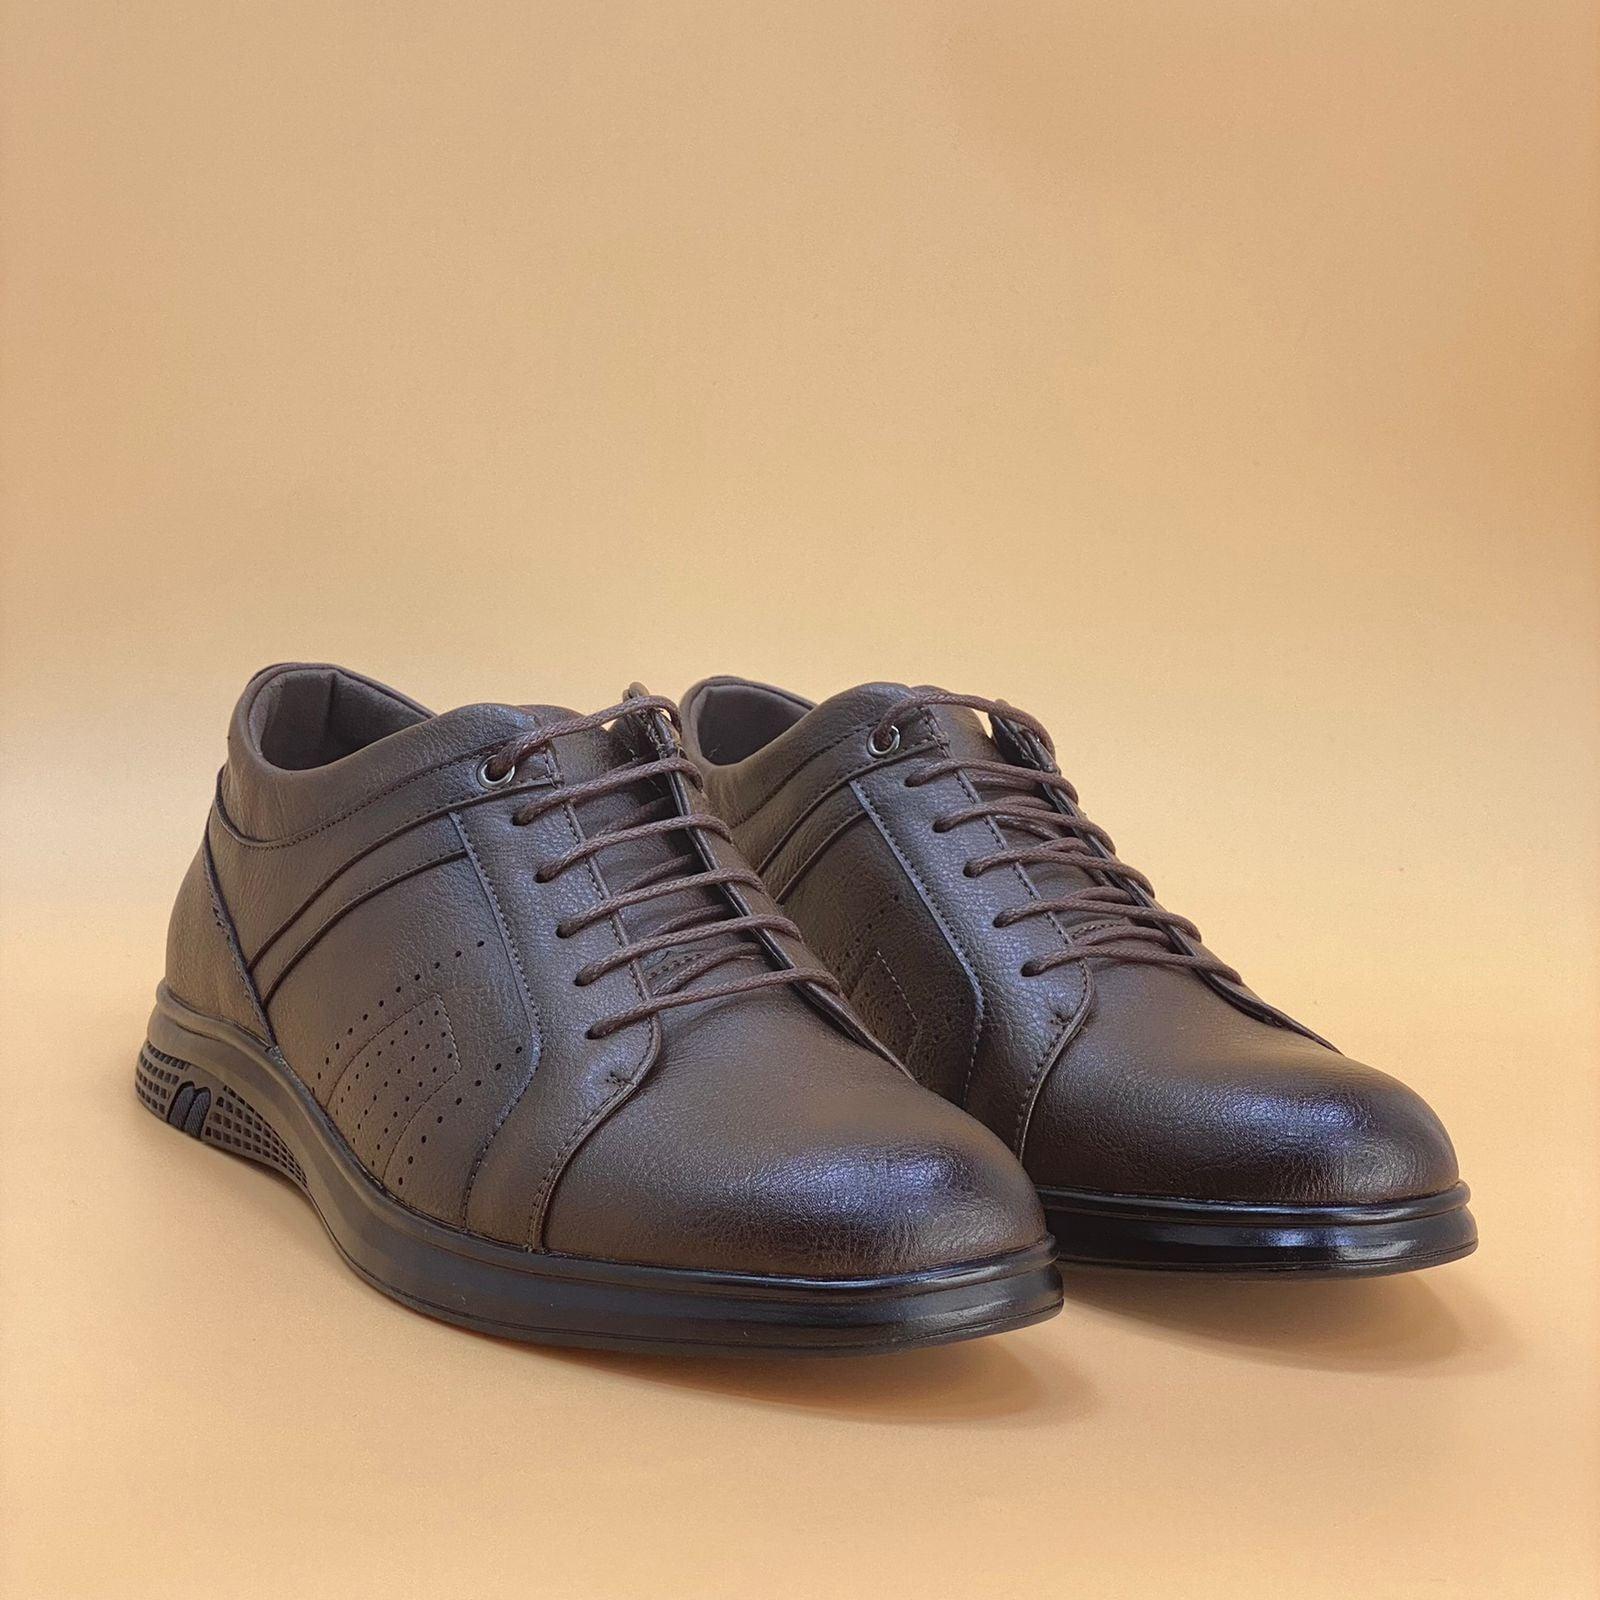 MEN SHOES  M128 , MADE IN CHINA - Olive Tree Shoes 